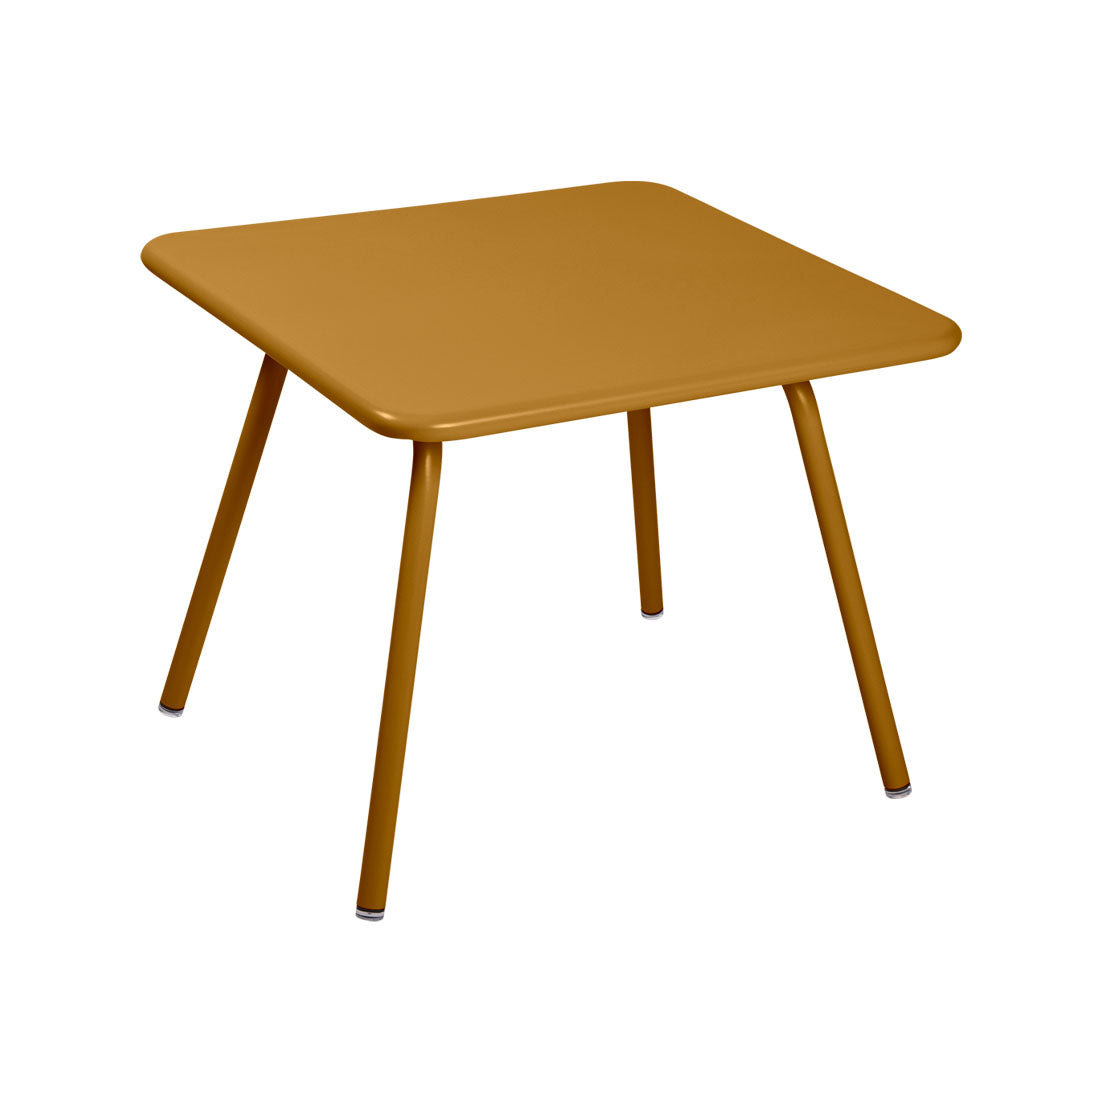 Fermob Luxembourg Kid Square Table 22x22"